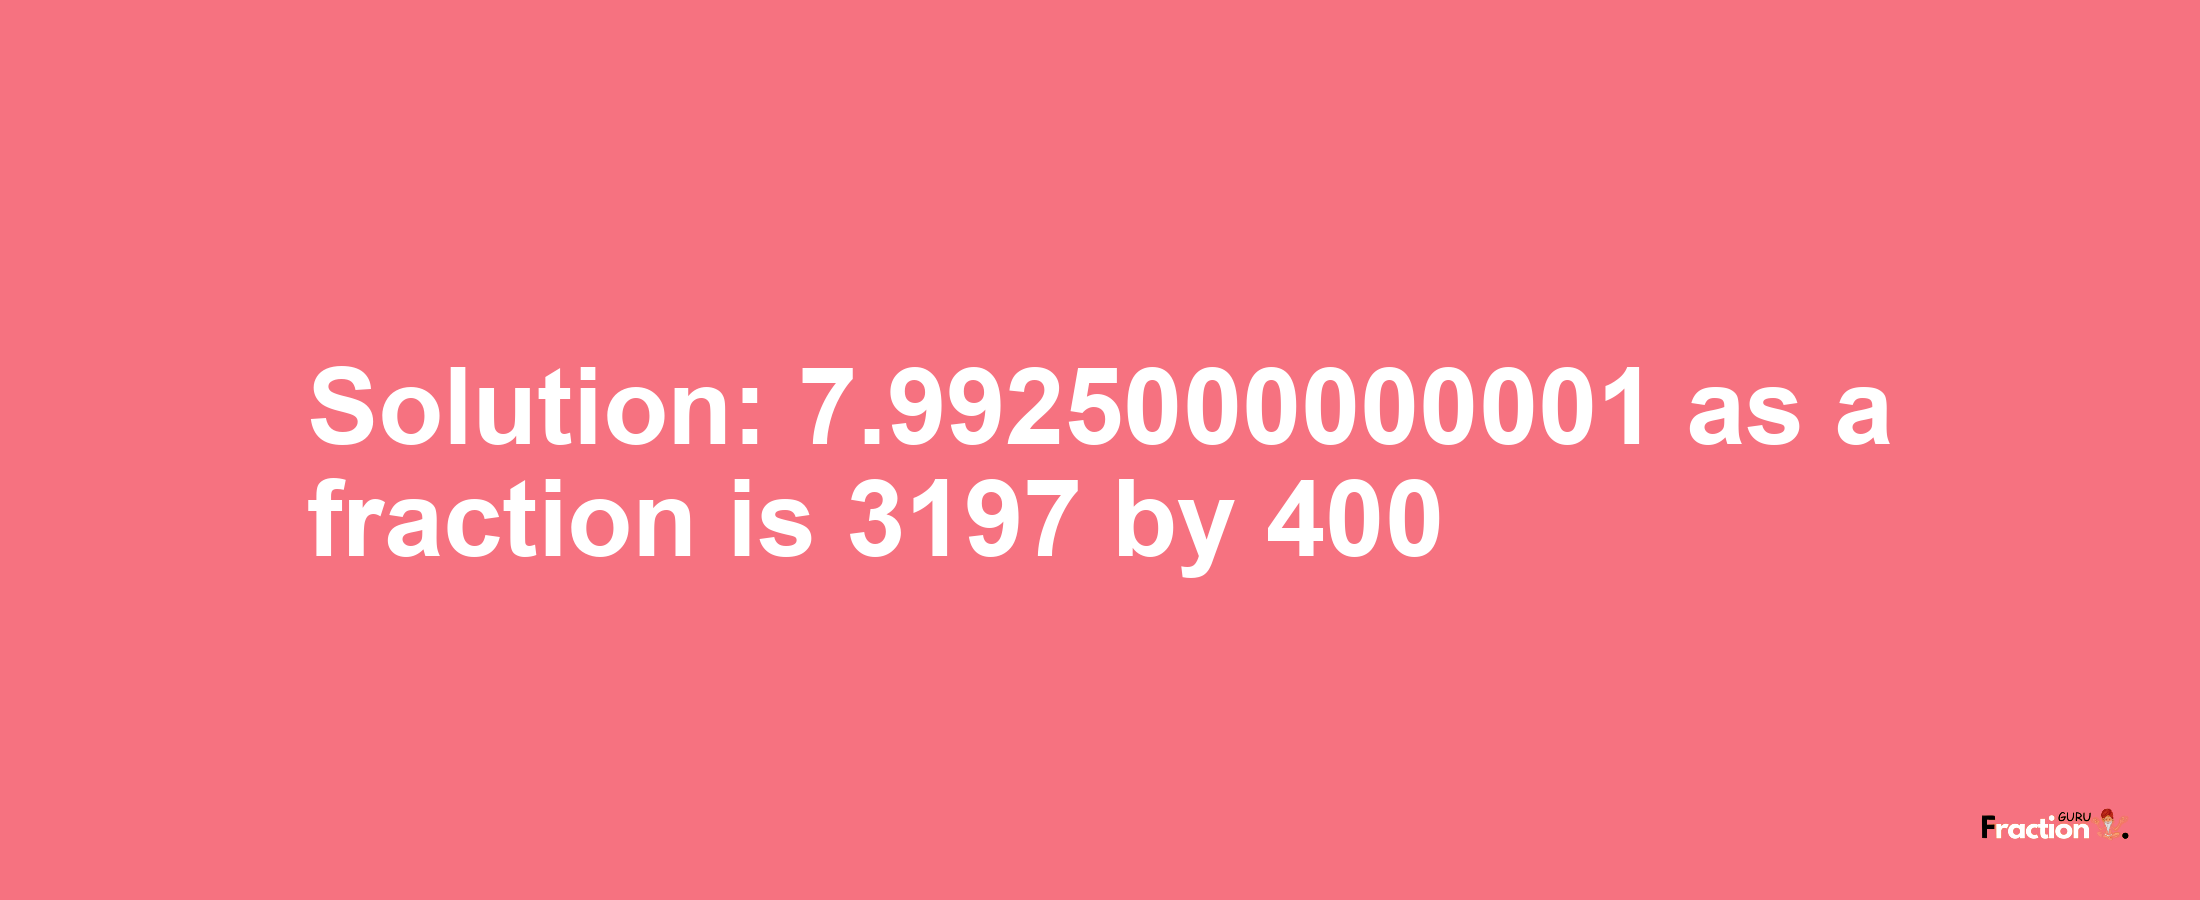 Solution:7.9925000000001 as a fraction is 3197/400